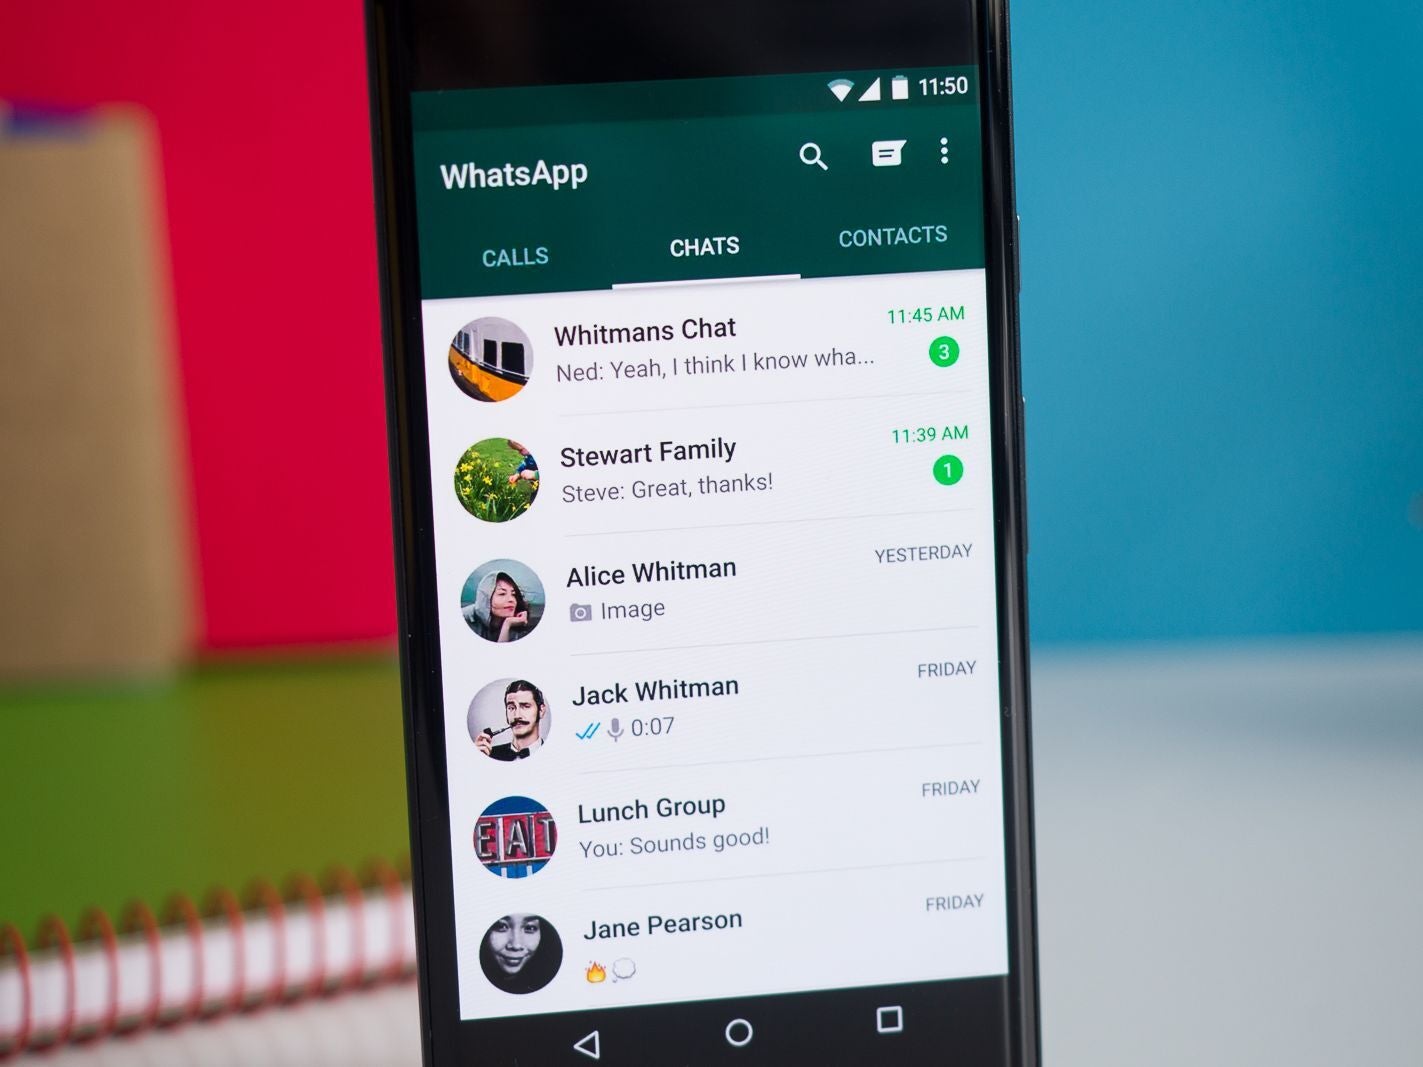 Regardless, WhatsApp is still one of the most used IM apps worldwide. - WhatsApp users can now reject Terms of Service, but that may come at the cost of app functions